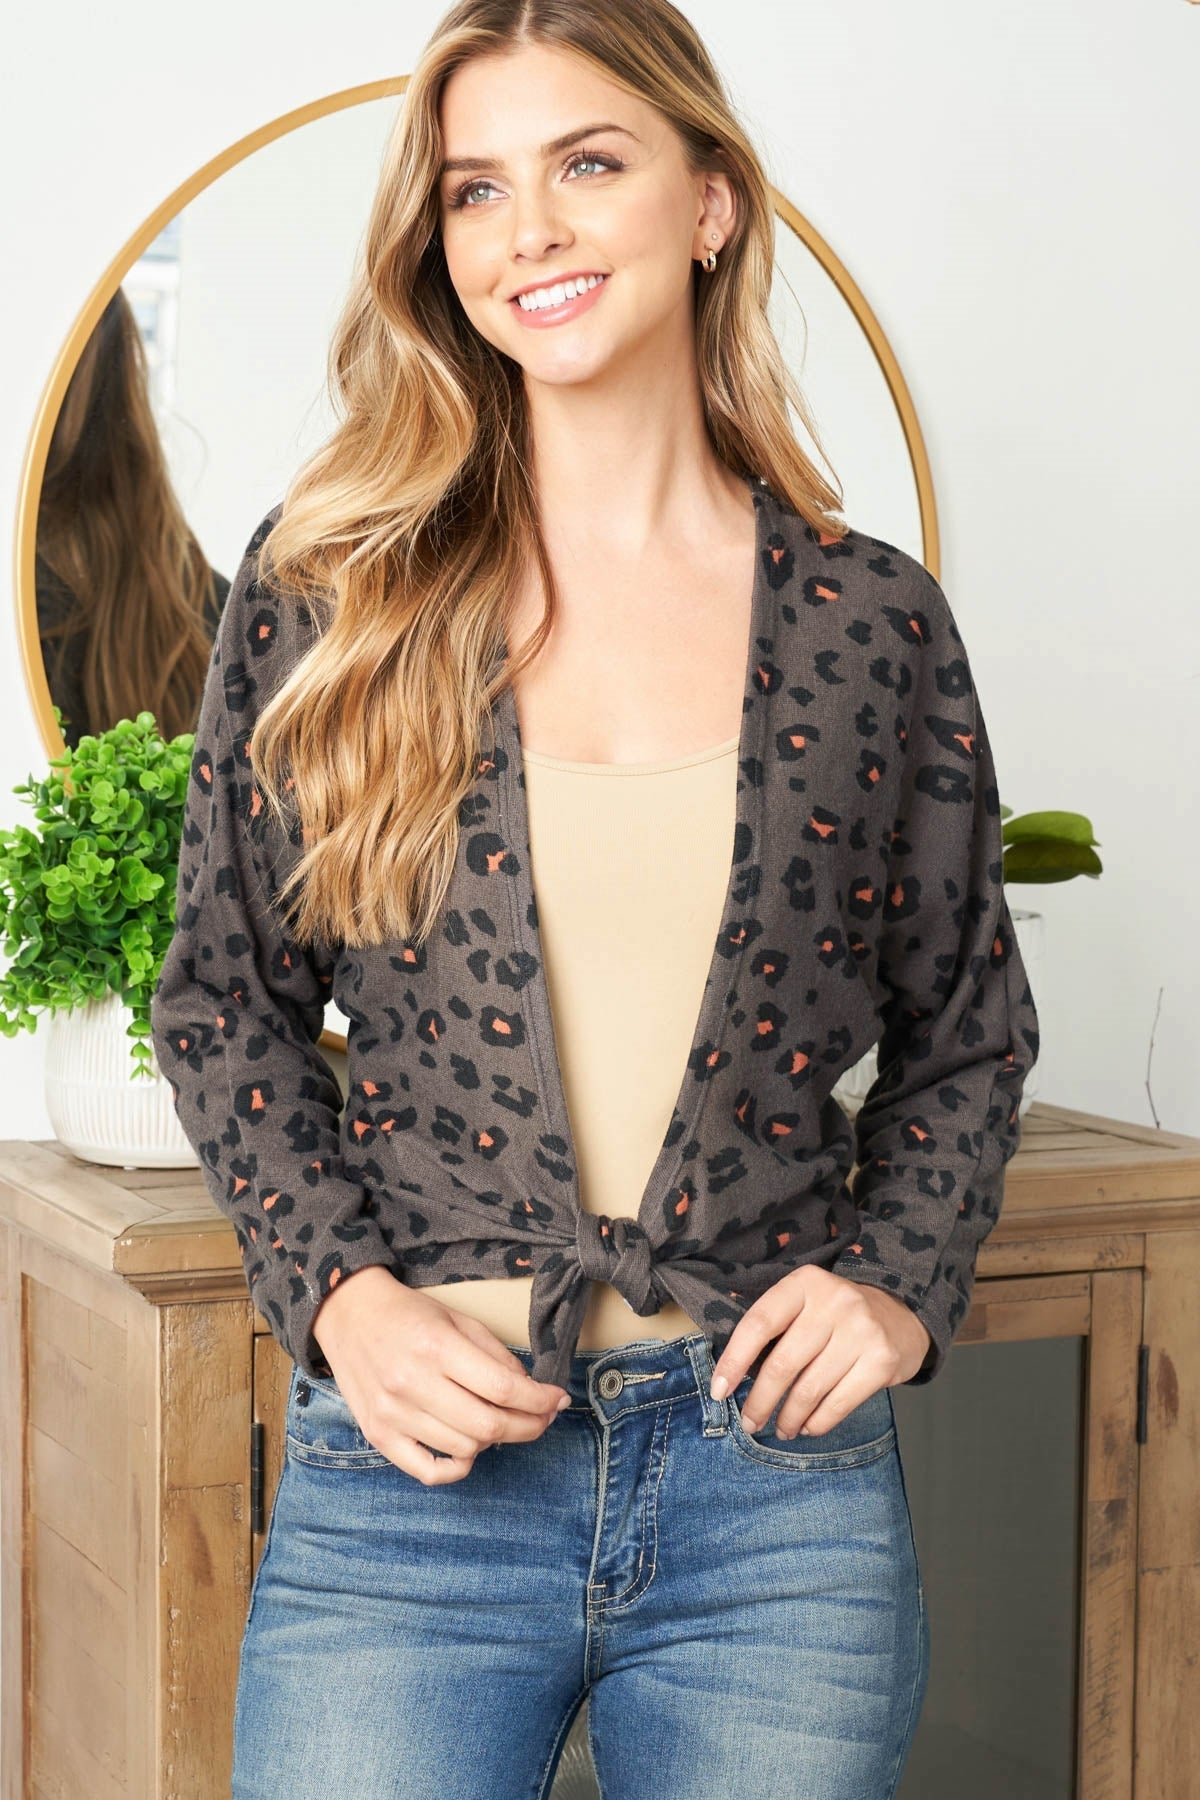 CHARCOAL ANIMAL TOP 3-2-1 (NOW $2.25 ONLY!)